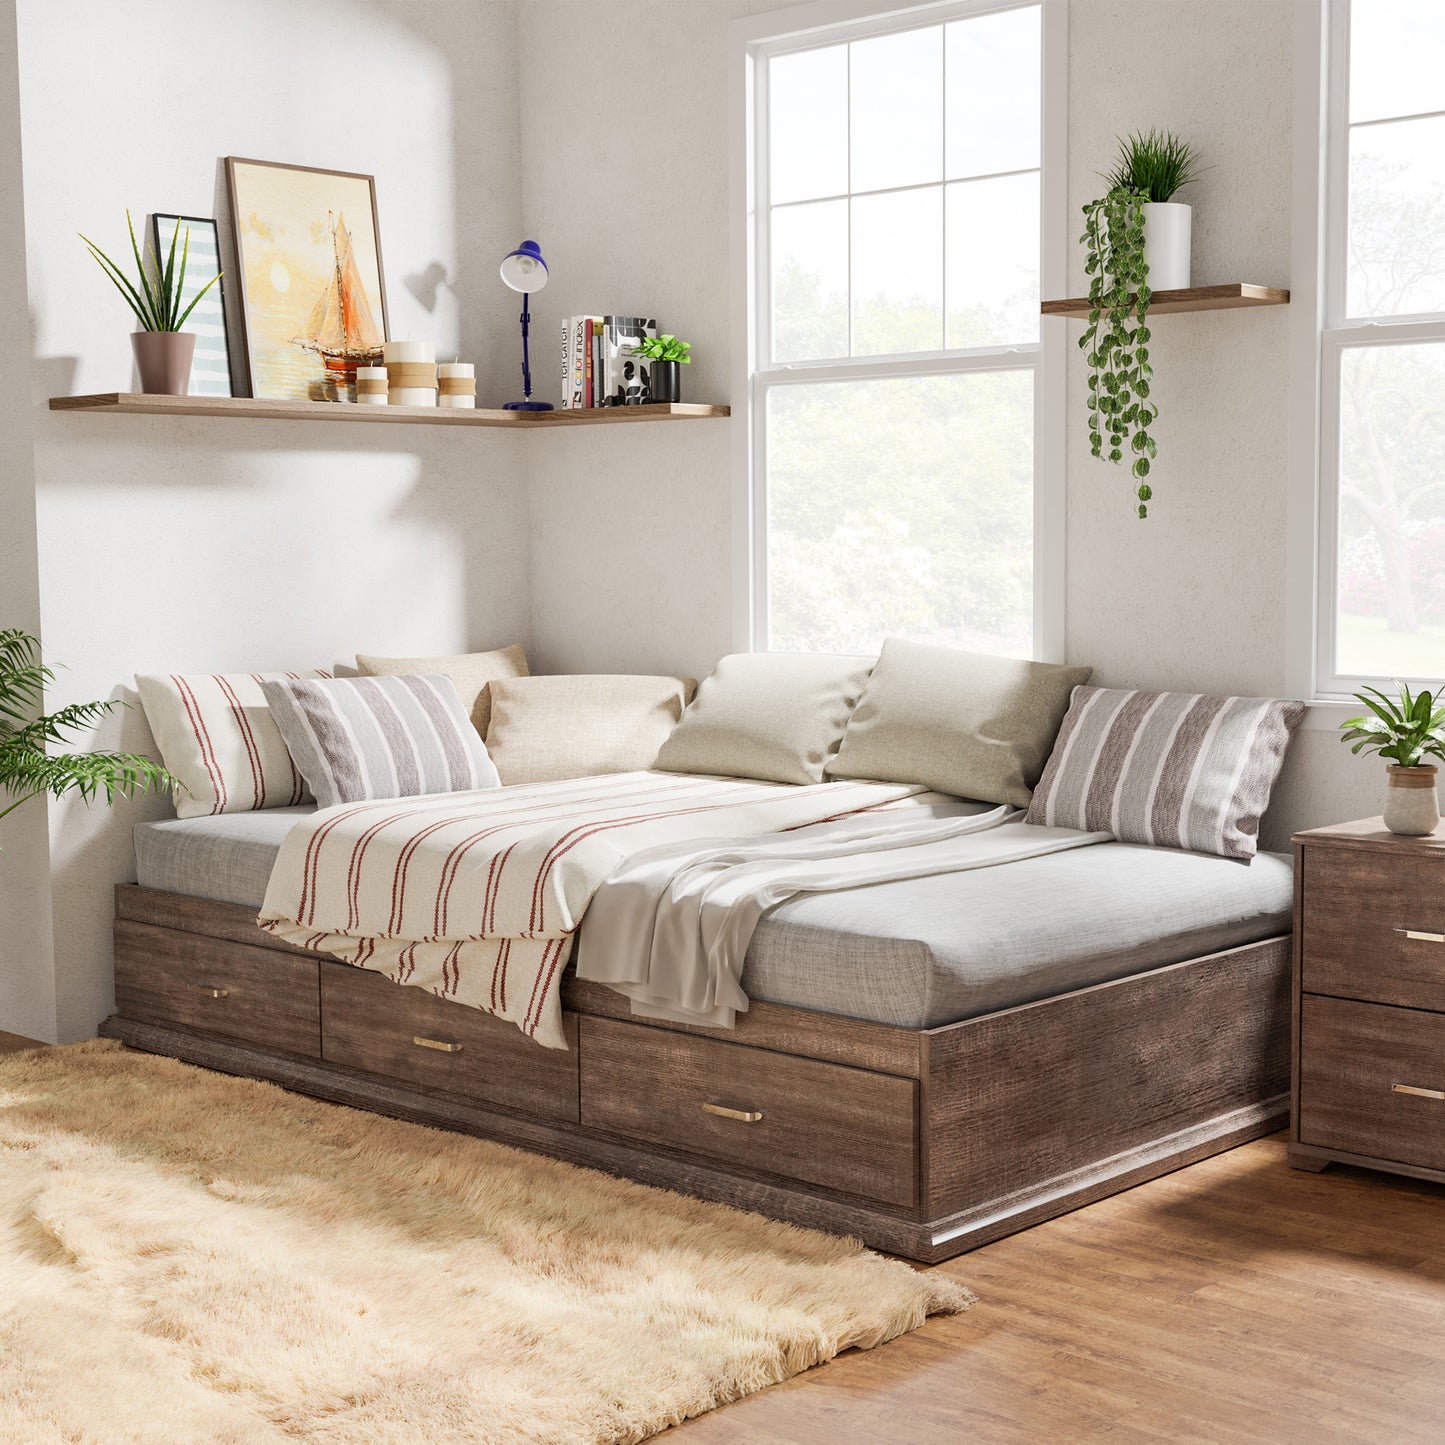 Right angled contemporary walnut three-drawer platform storage bed in a bedroom with accessories